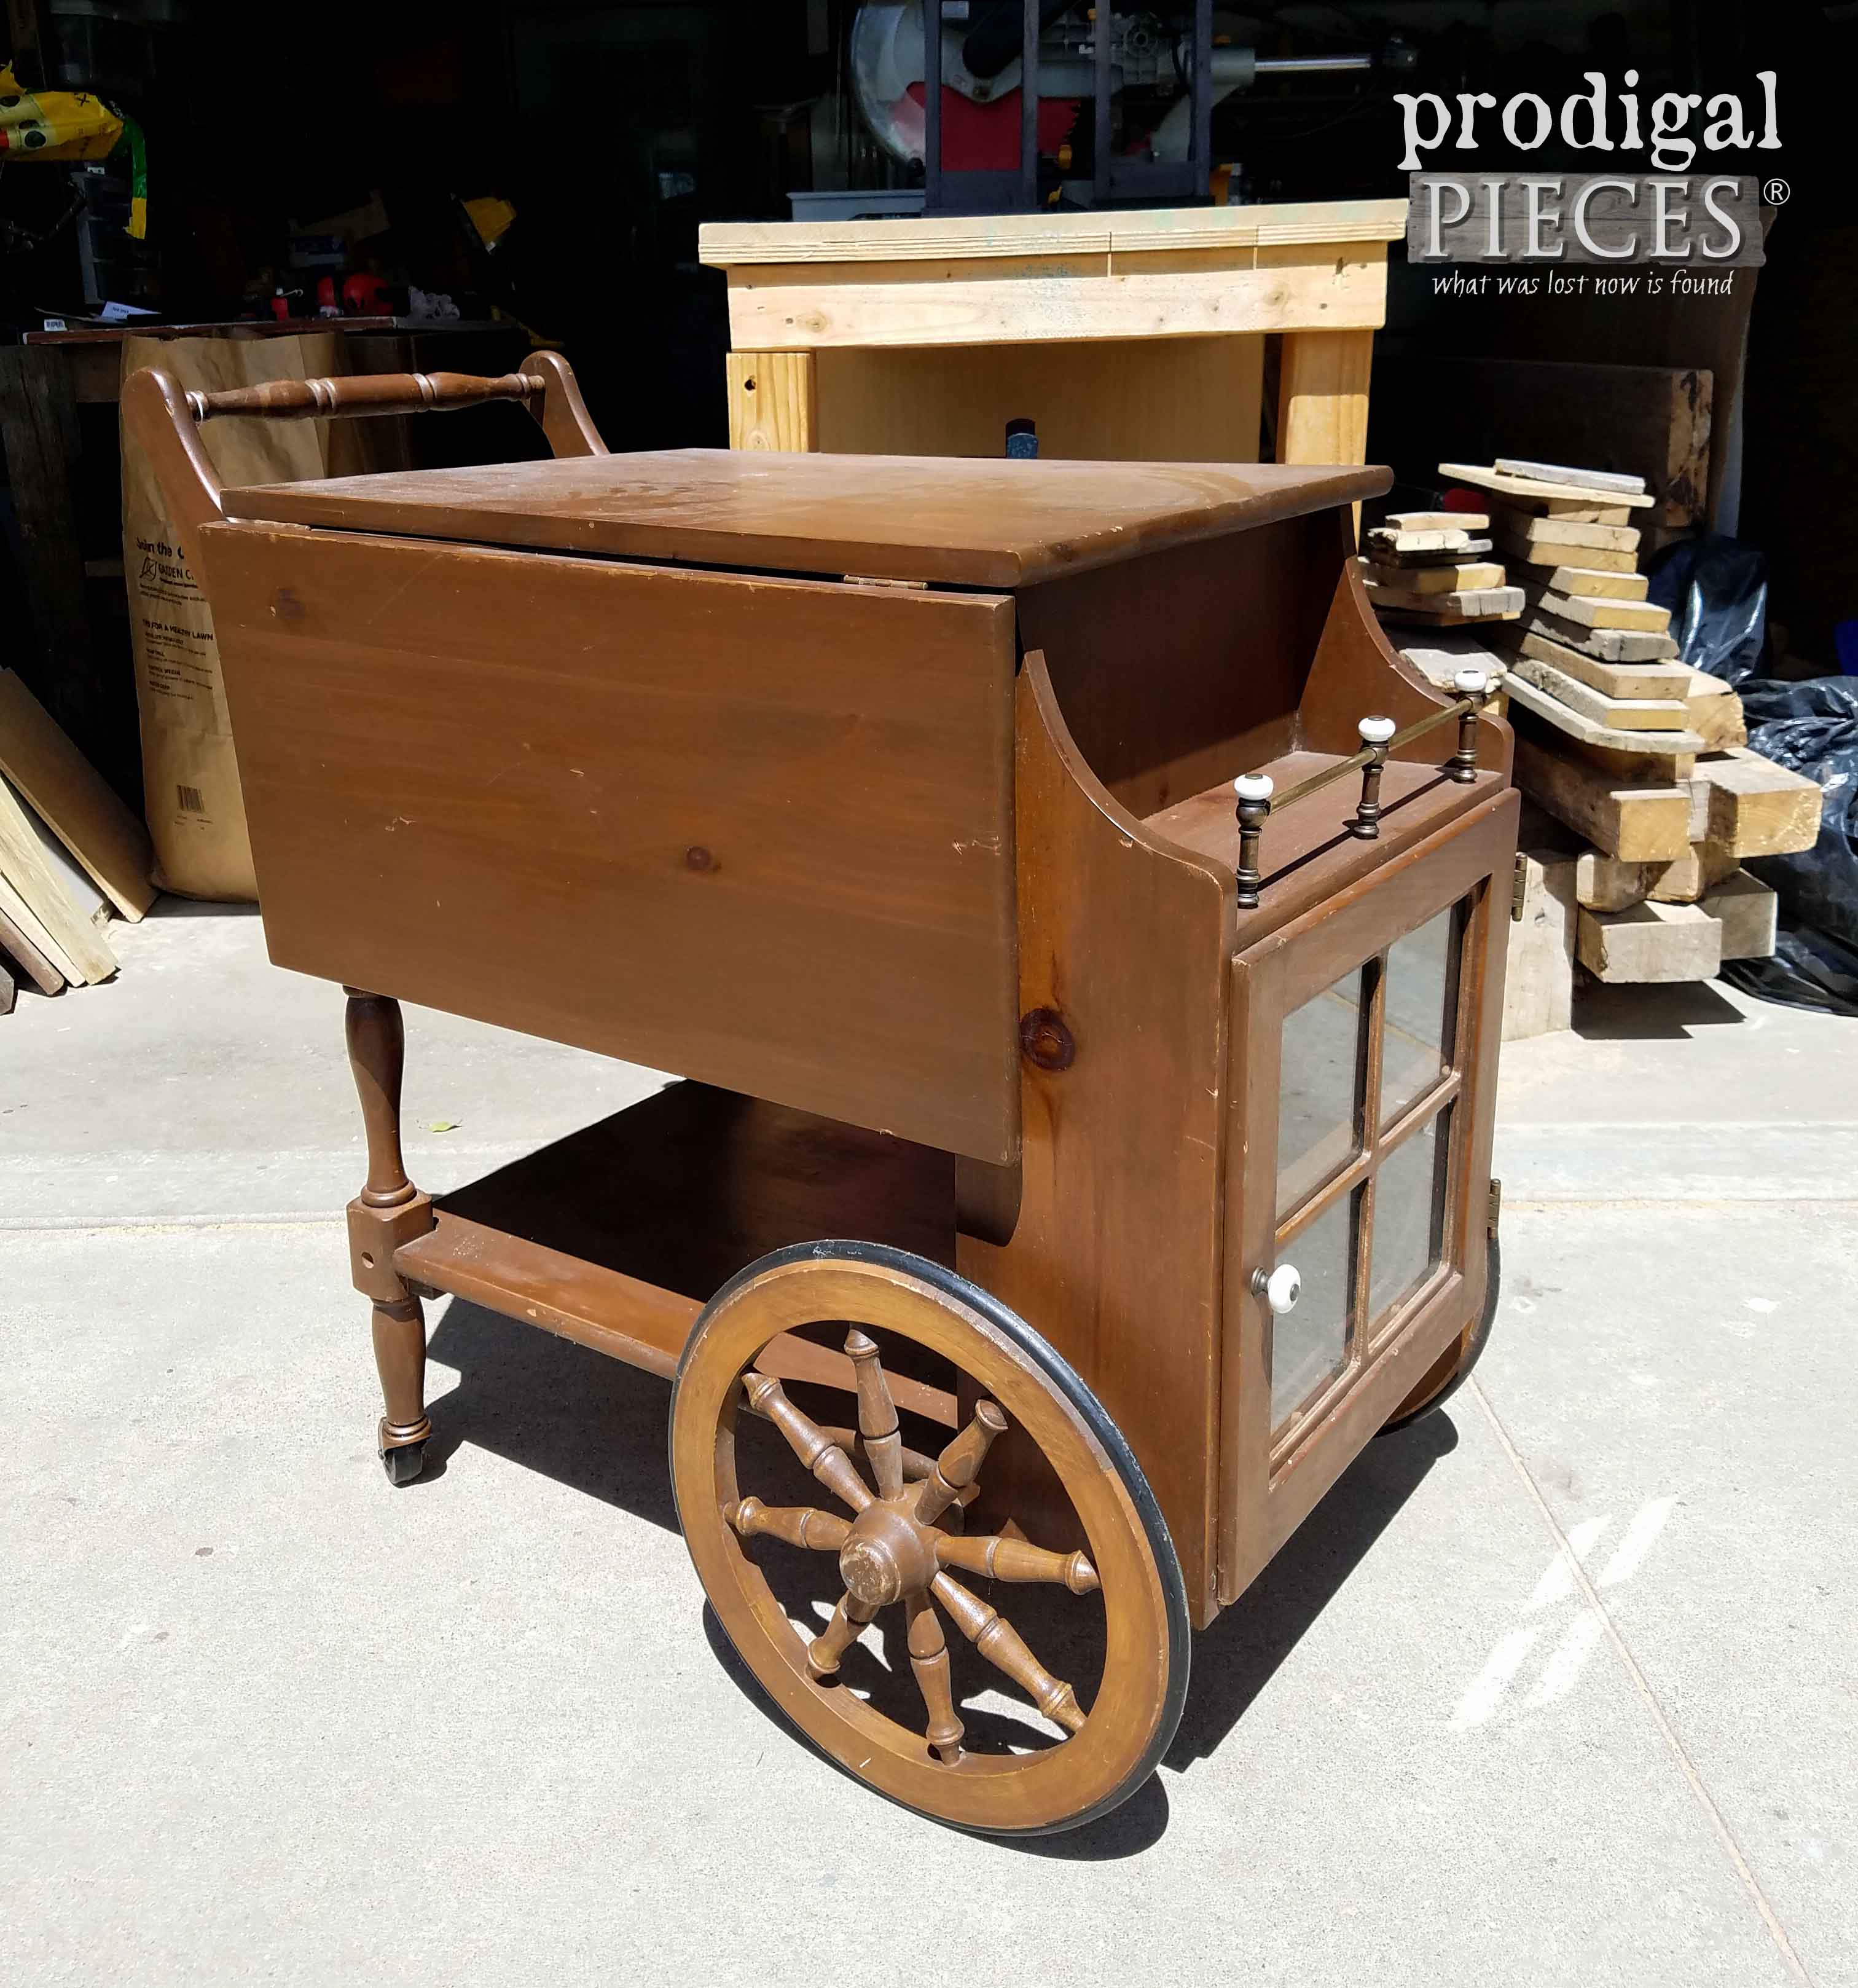 Vintage Tea Cart Refreshed With Paint, Wooden Tea Carts With Wheels